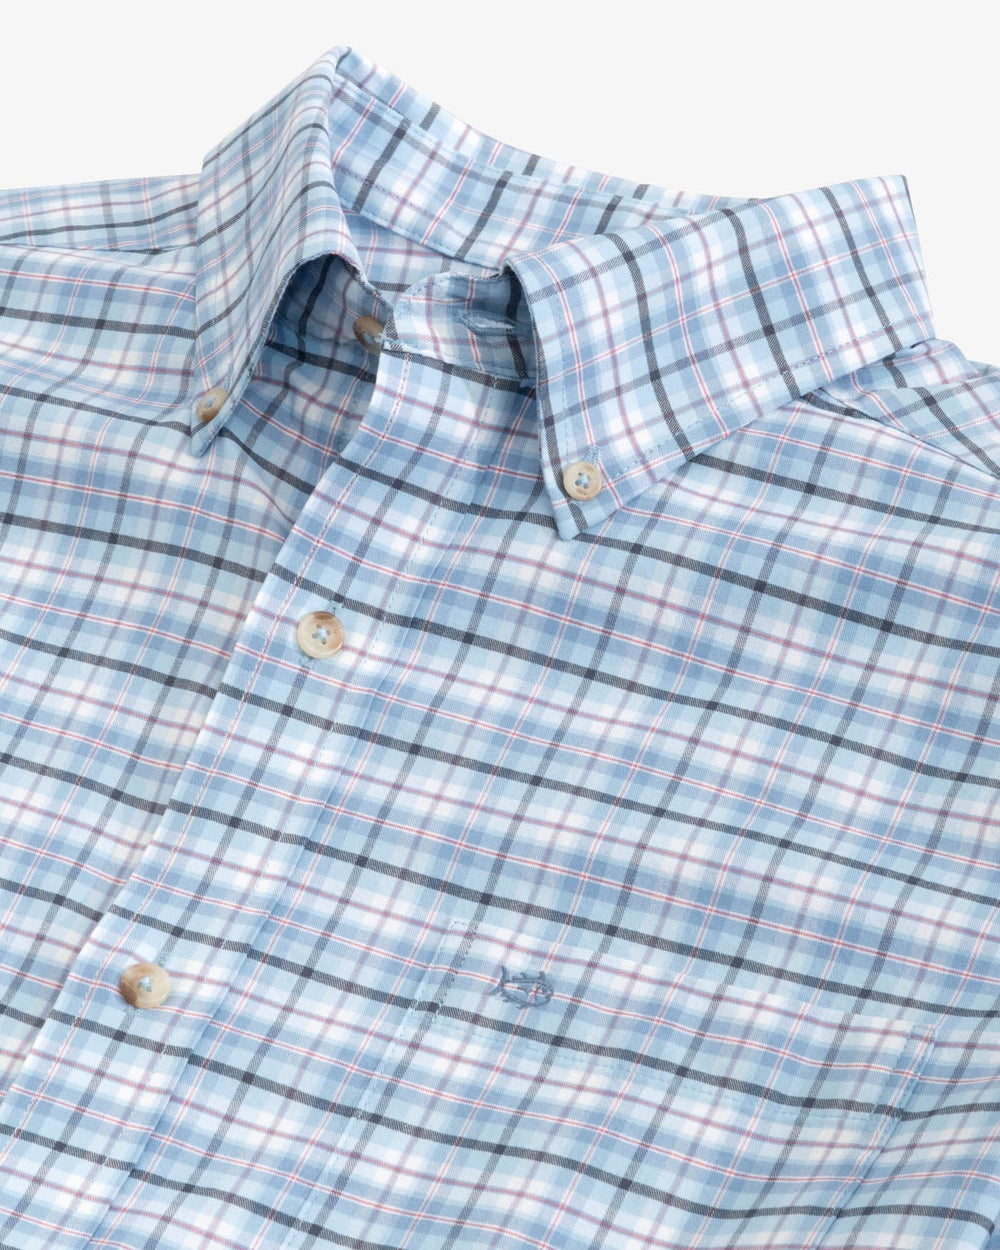 The detail view of the Southern Tide Coastal Passage Patton Plaid Sport Shirts by Southern Tide - Dream Blue